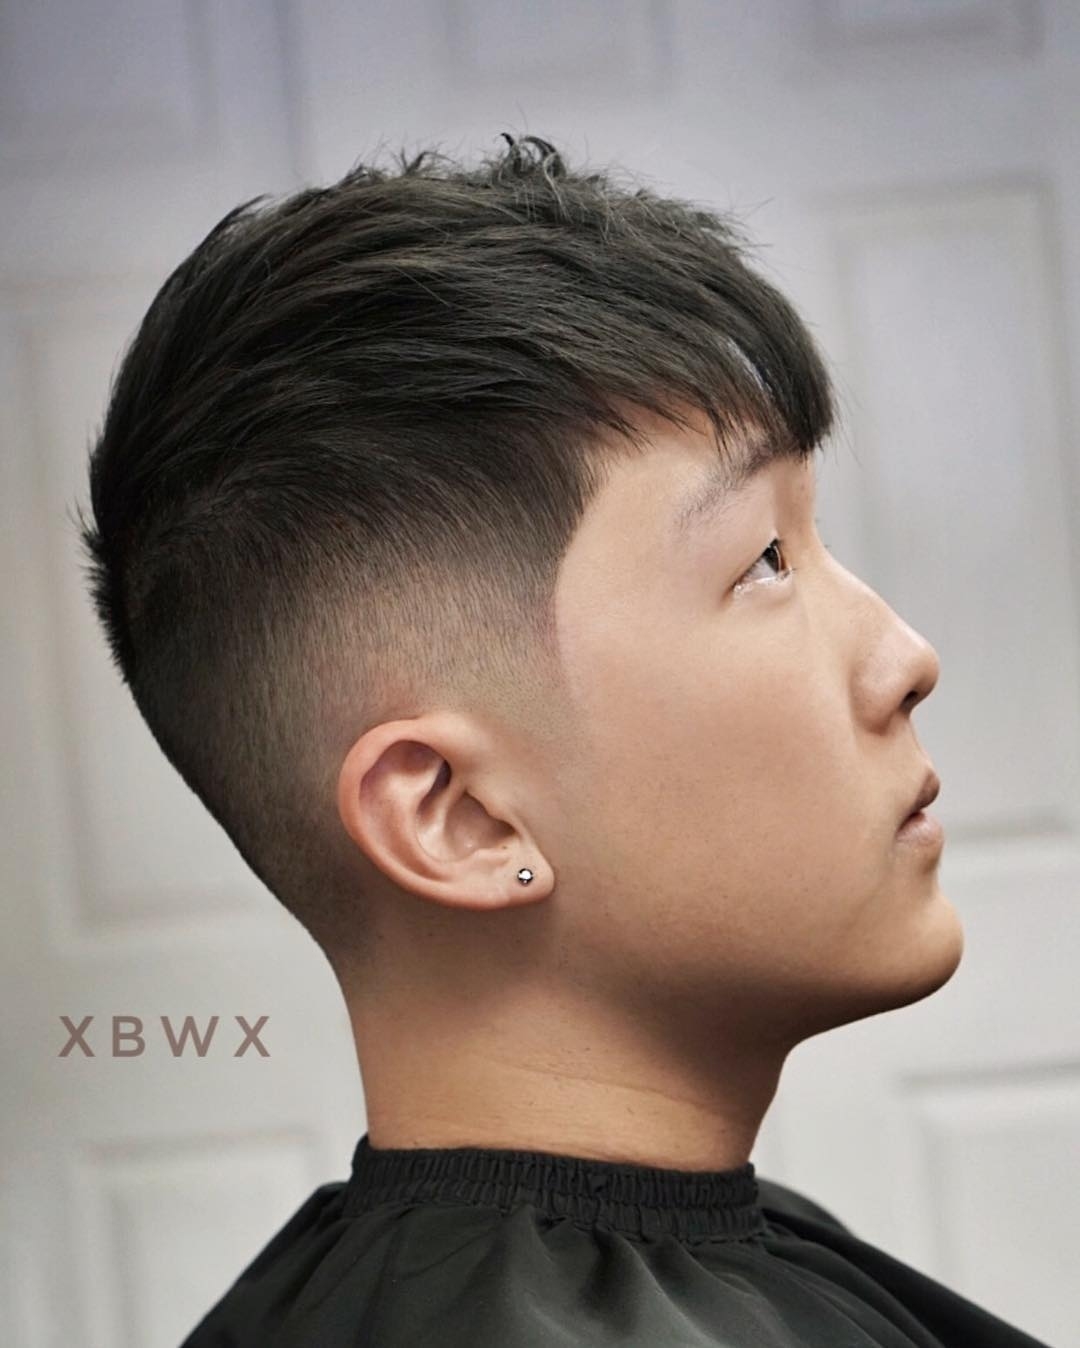 Best Hairstyles For Asian Men pertaining to Best Cool Hairstyles For Asian Guys